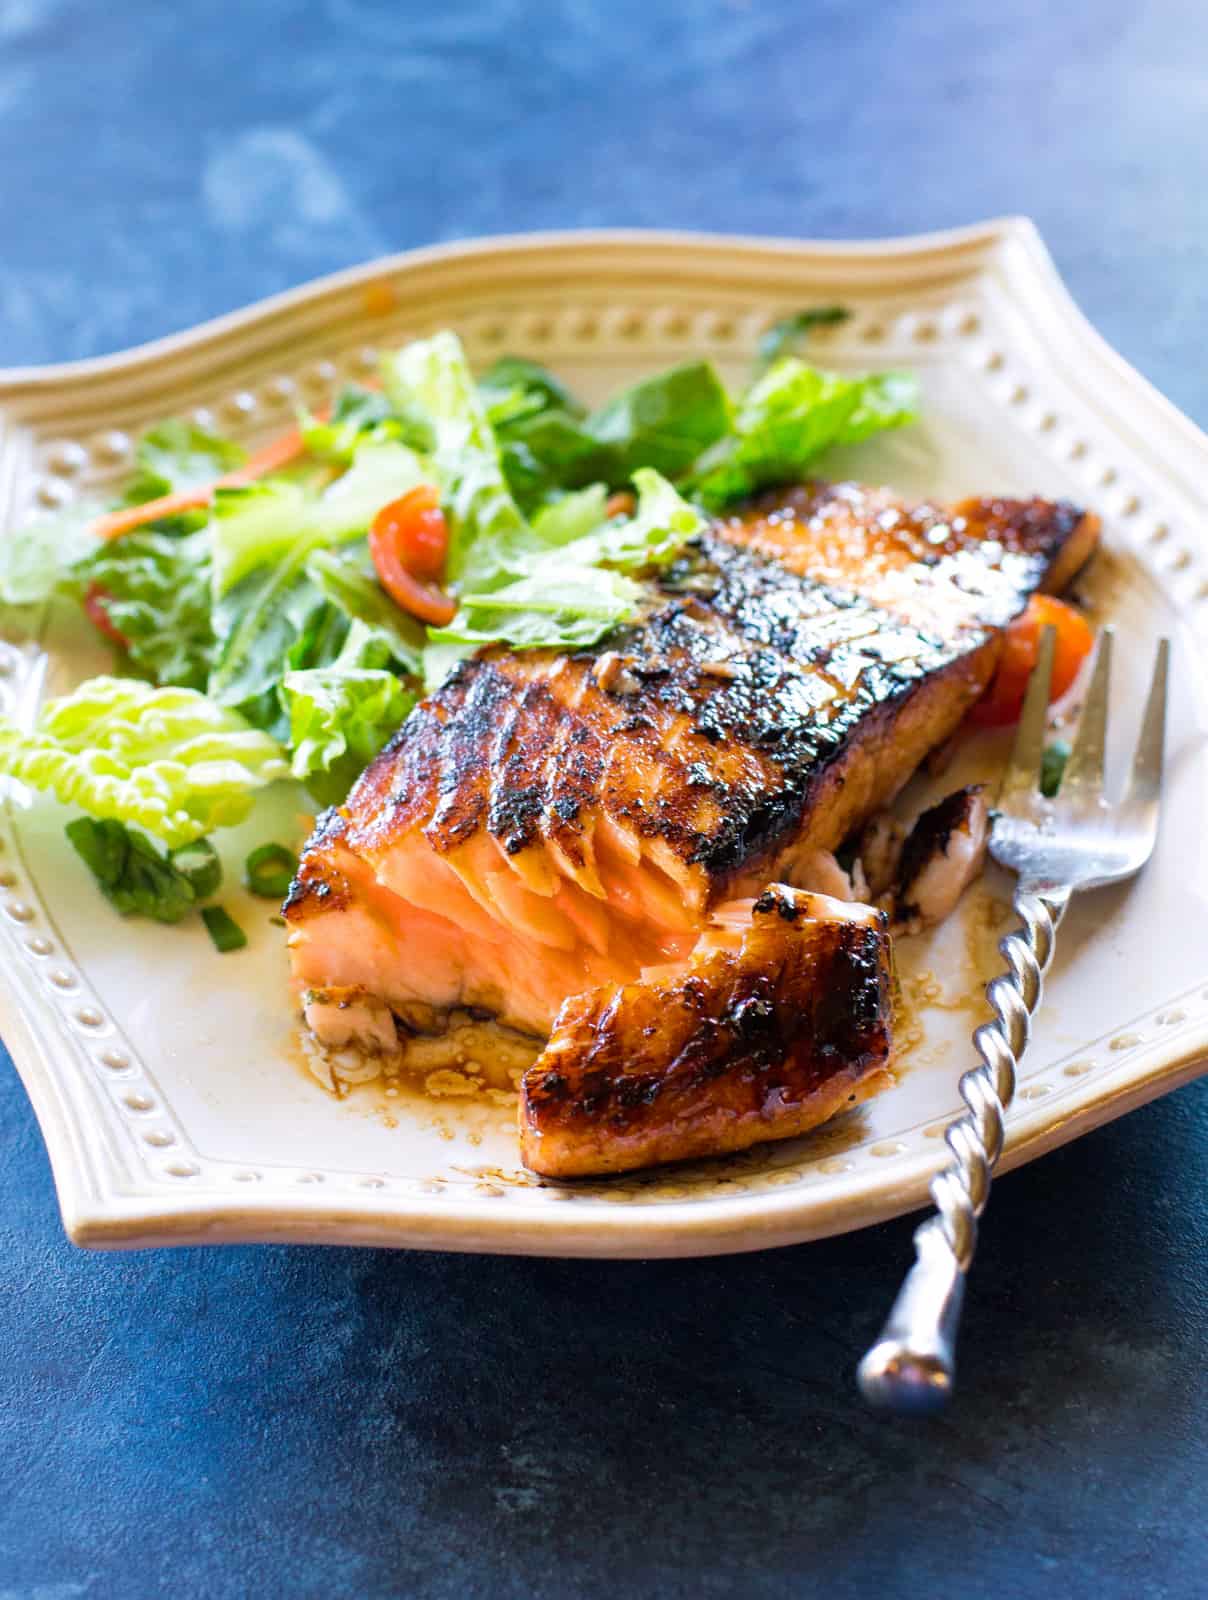 Grilled Asian Salmon Dinner Recipe Healthy The Girl Who Ate Everything,How To Make A Strawberry Mojito